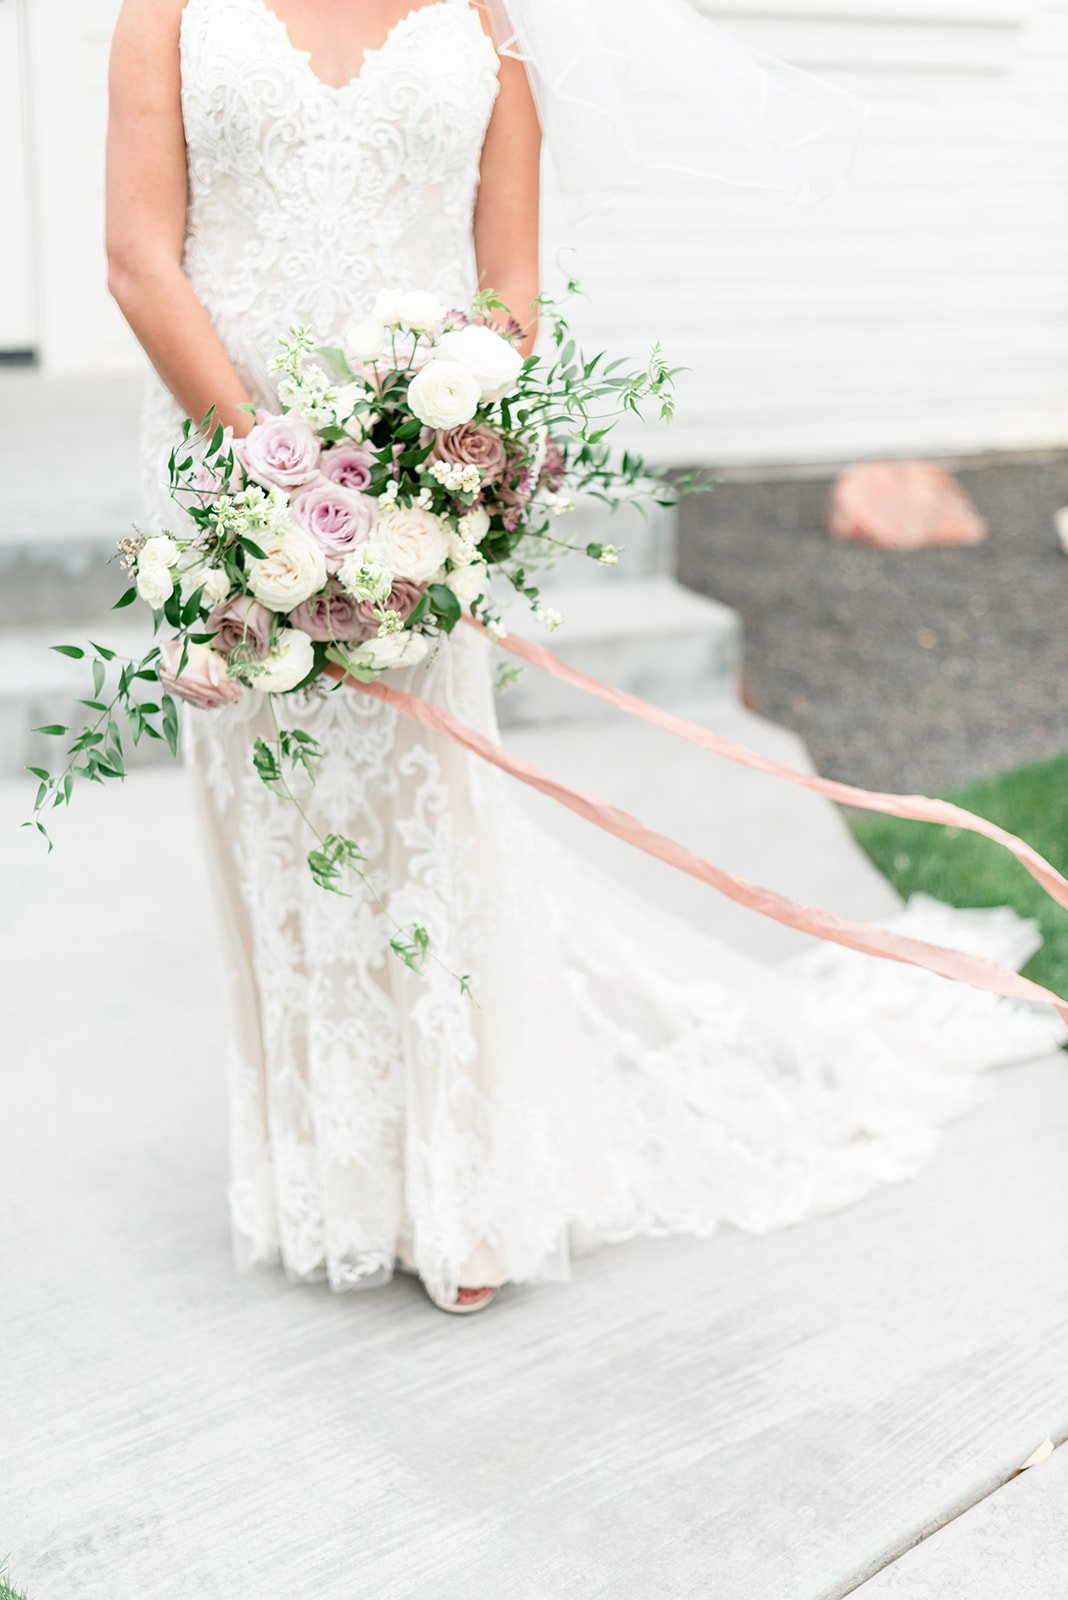 denise and bryan photography boise and mccall wedding photographers still water hollow-bouquet.jpg